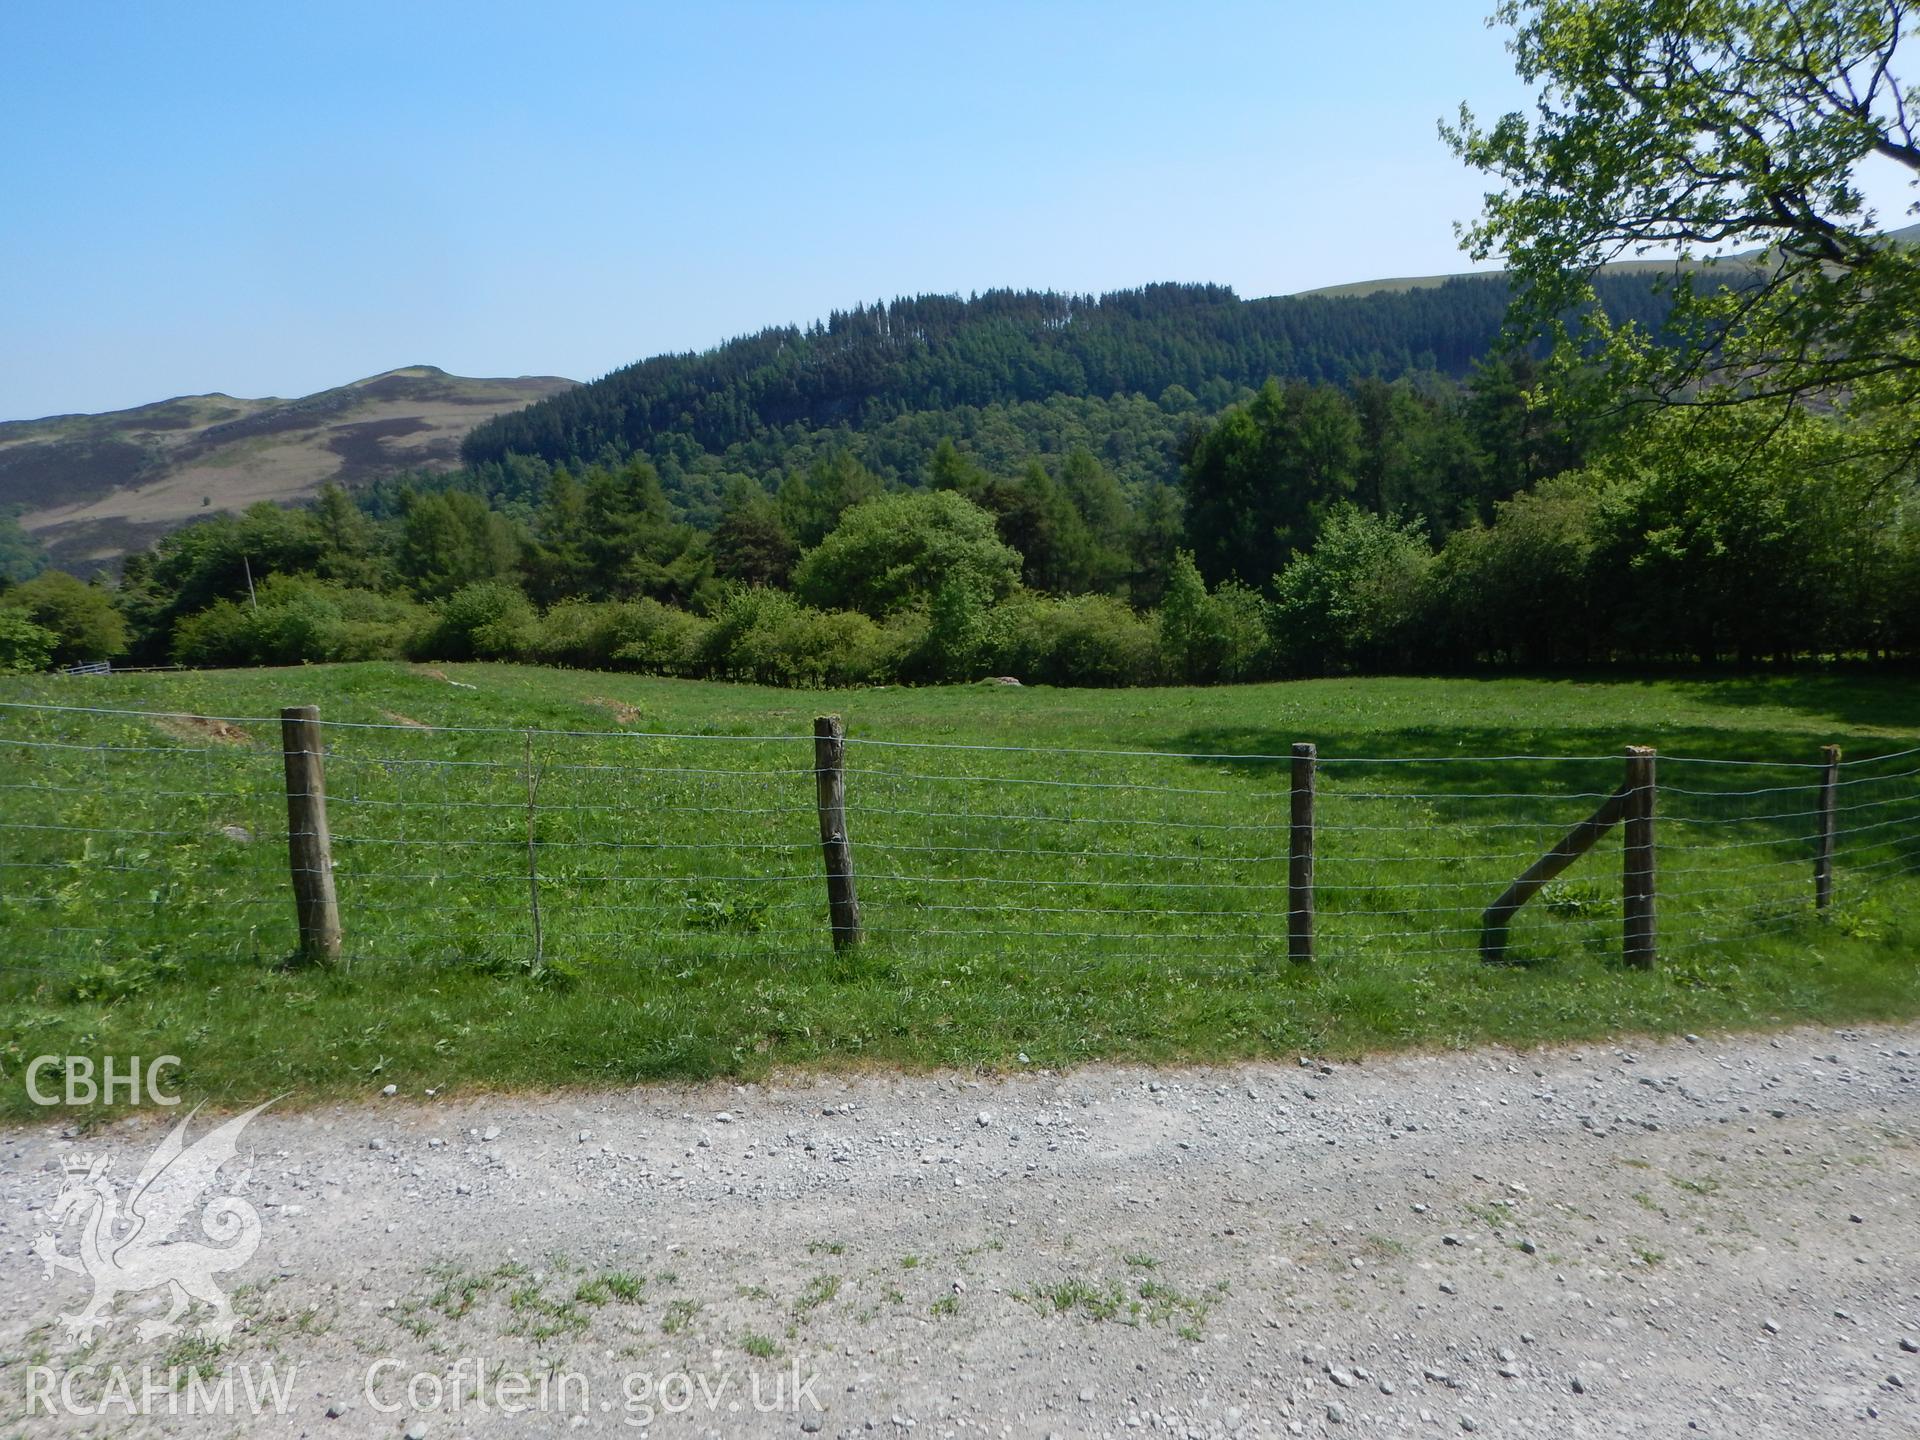 View towards cable route from Pen-glan-einon farmstead, looking south-east. Photographed for Archaeological Desk Based Assessment of Afon Claerwen, Elan Valley, Rhayader. Assessment conducted by Archaeology Wales in 2018. Report no. 1681. Project no. 2573.